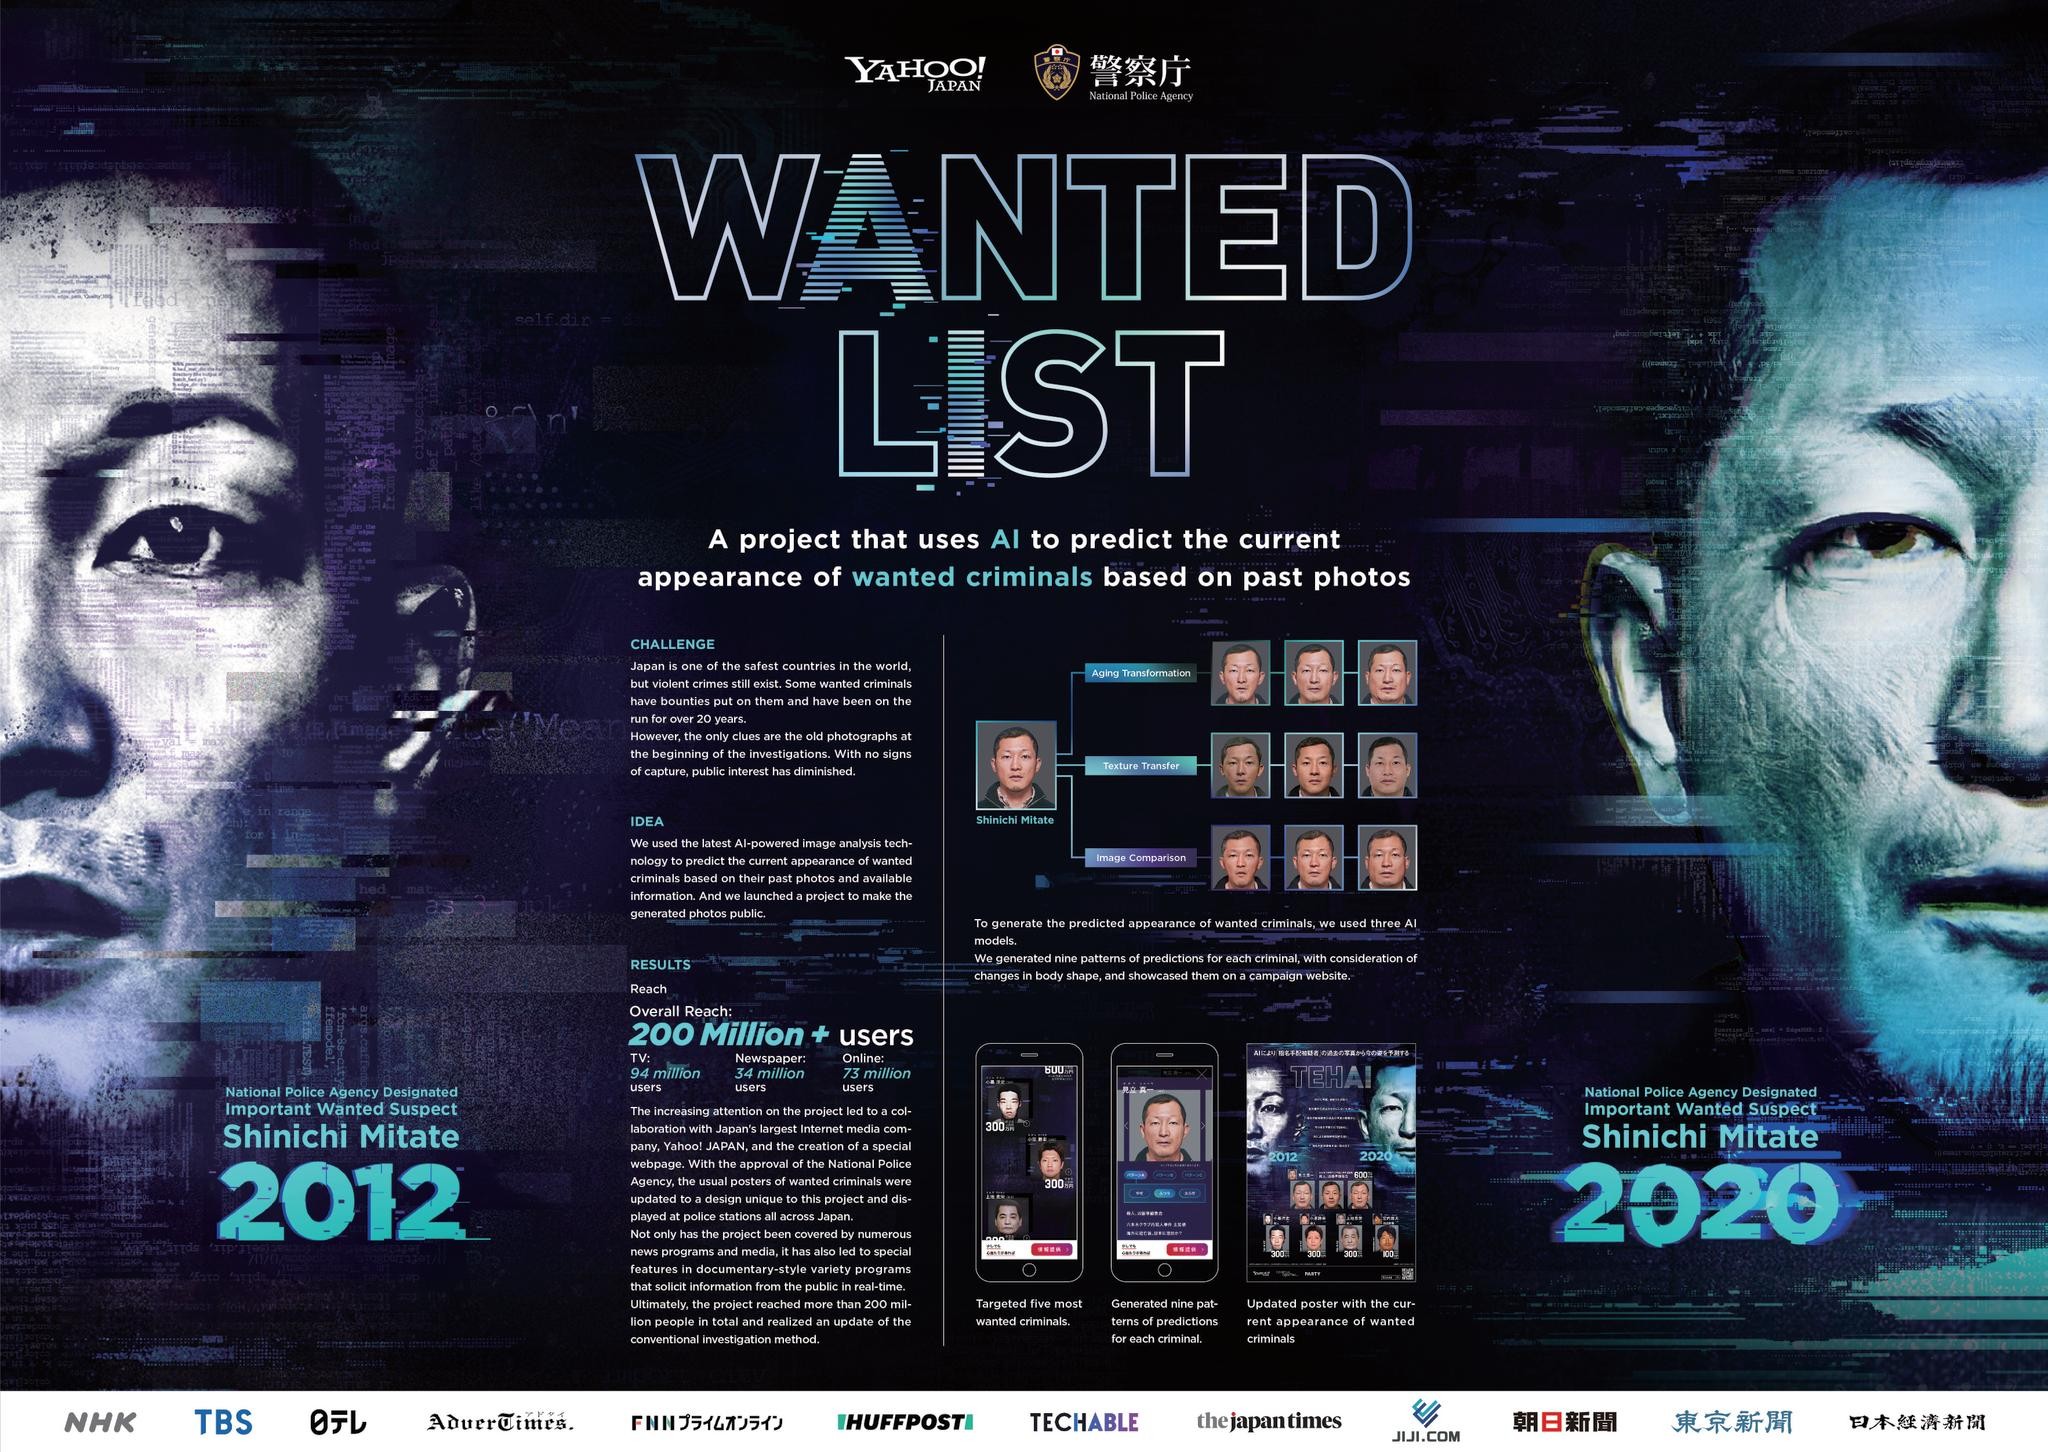 WANTED LIST